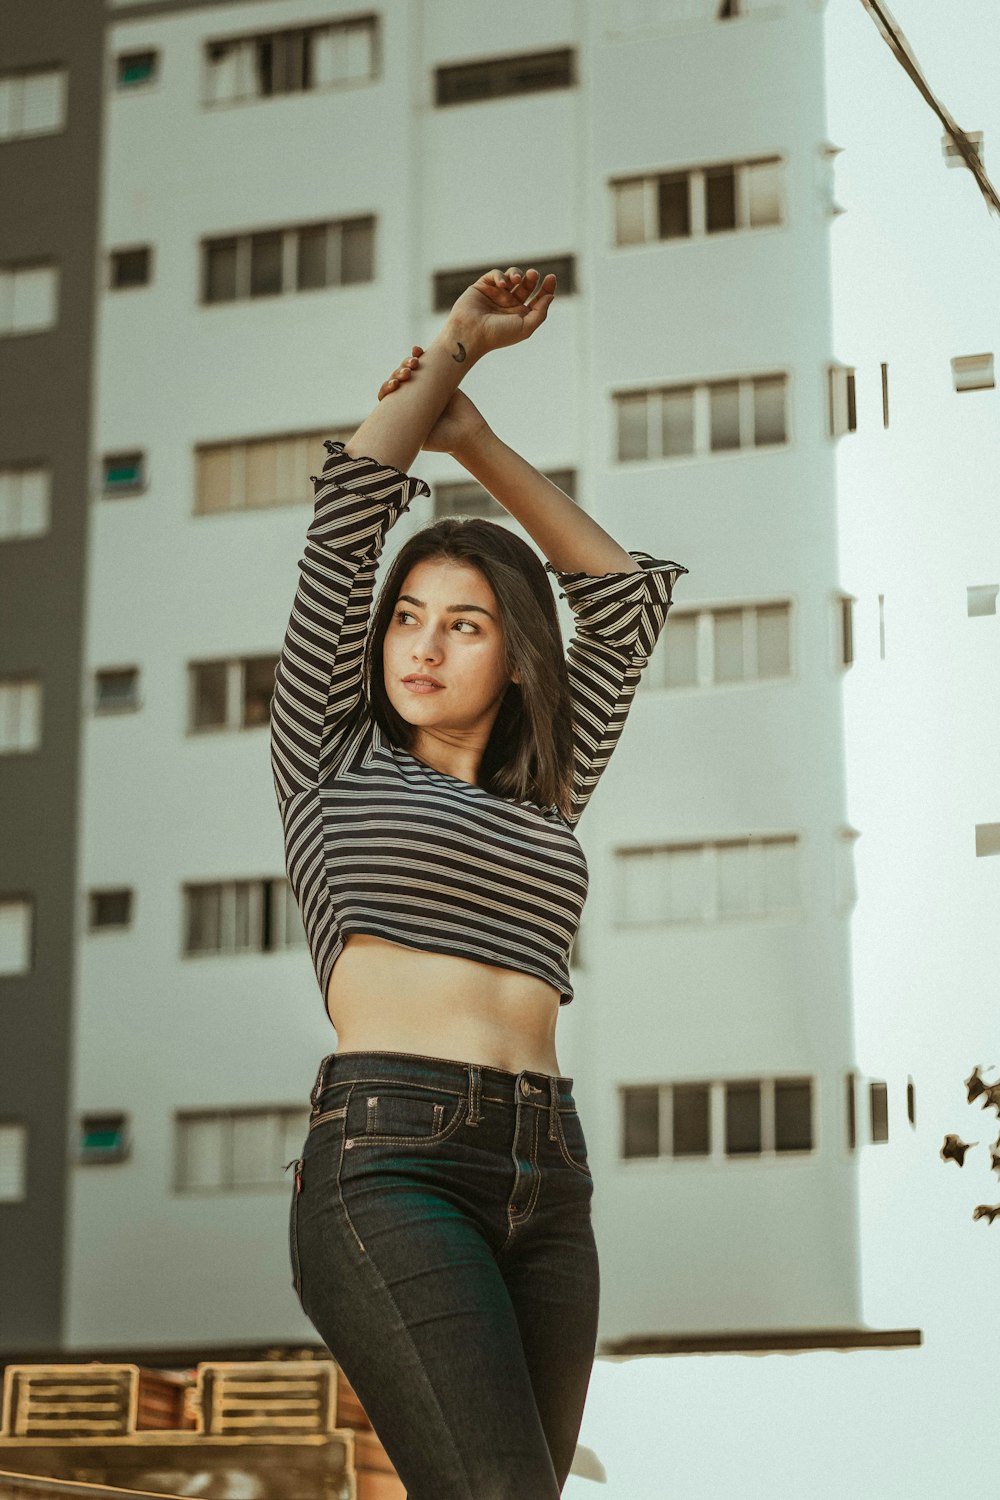 750+ Crop Top Pictures [HD] | Download Free Images on Unsplash